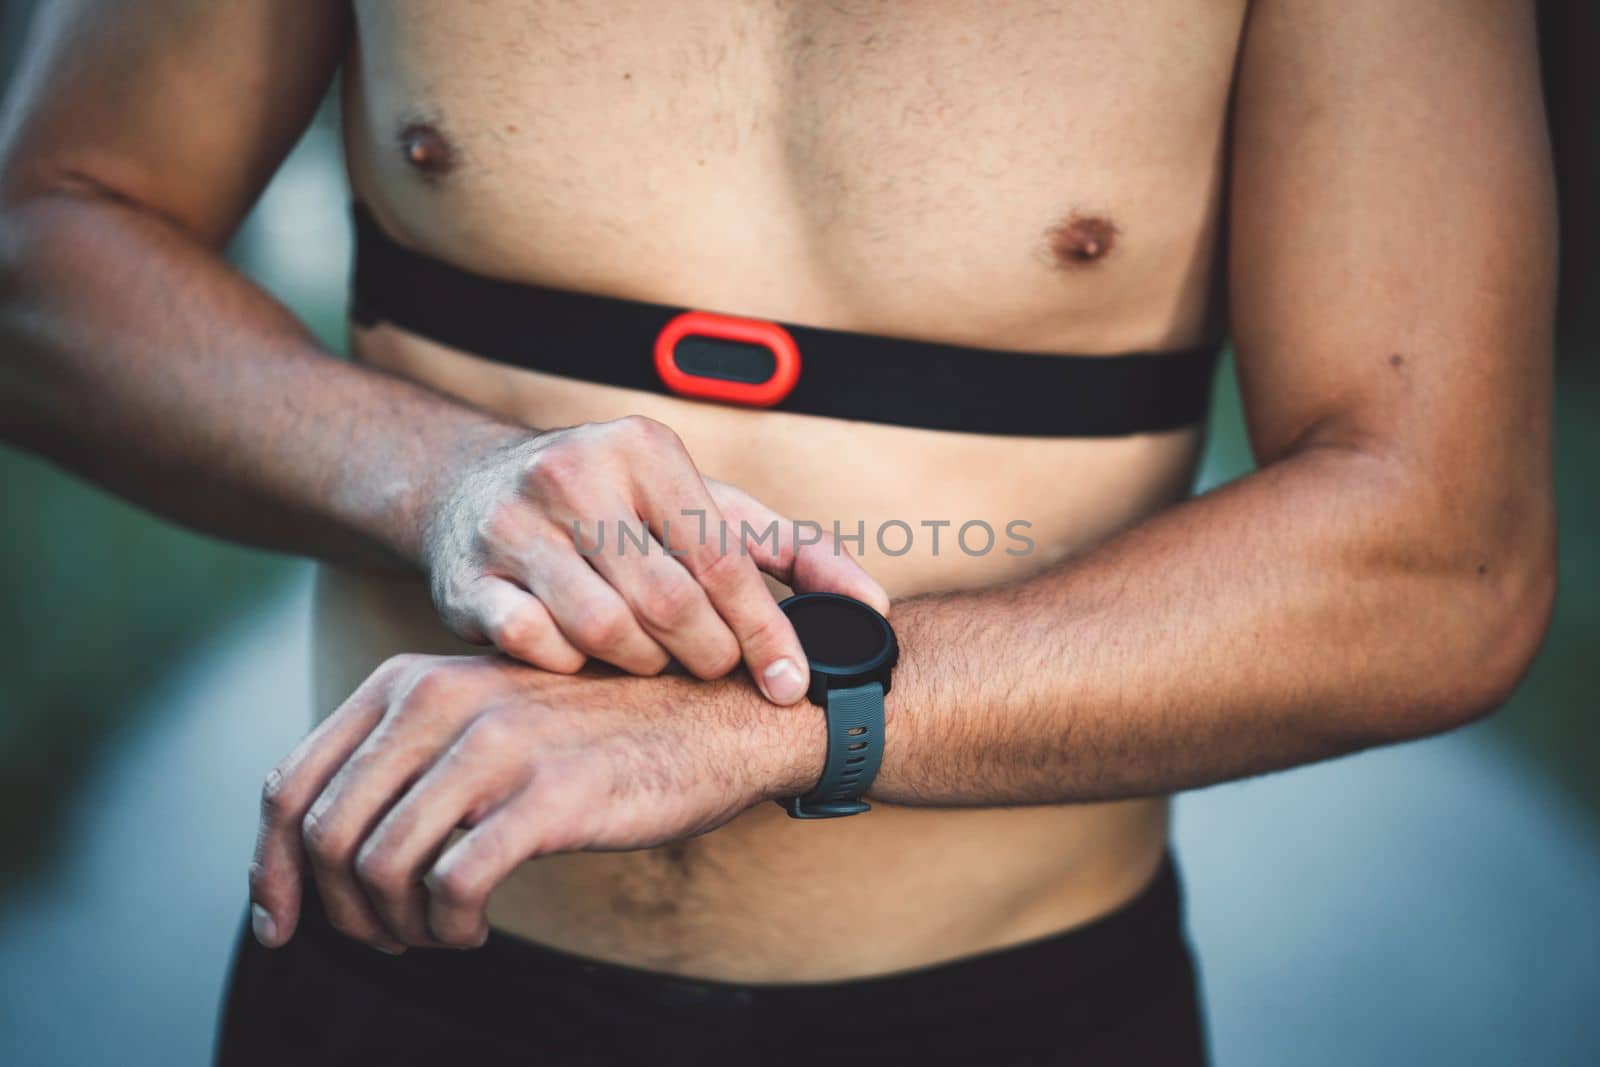 Fit man checking smart watch wearable technology sport smartwatch on workout outside. Man wearing smart watch during his training, measuring his activity. High quality photo